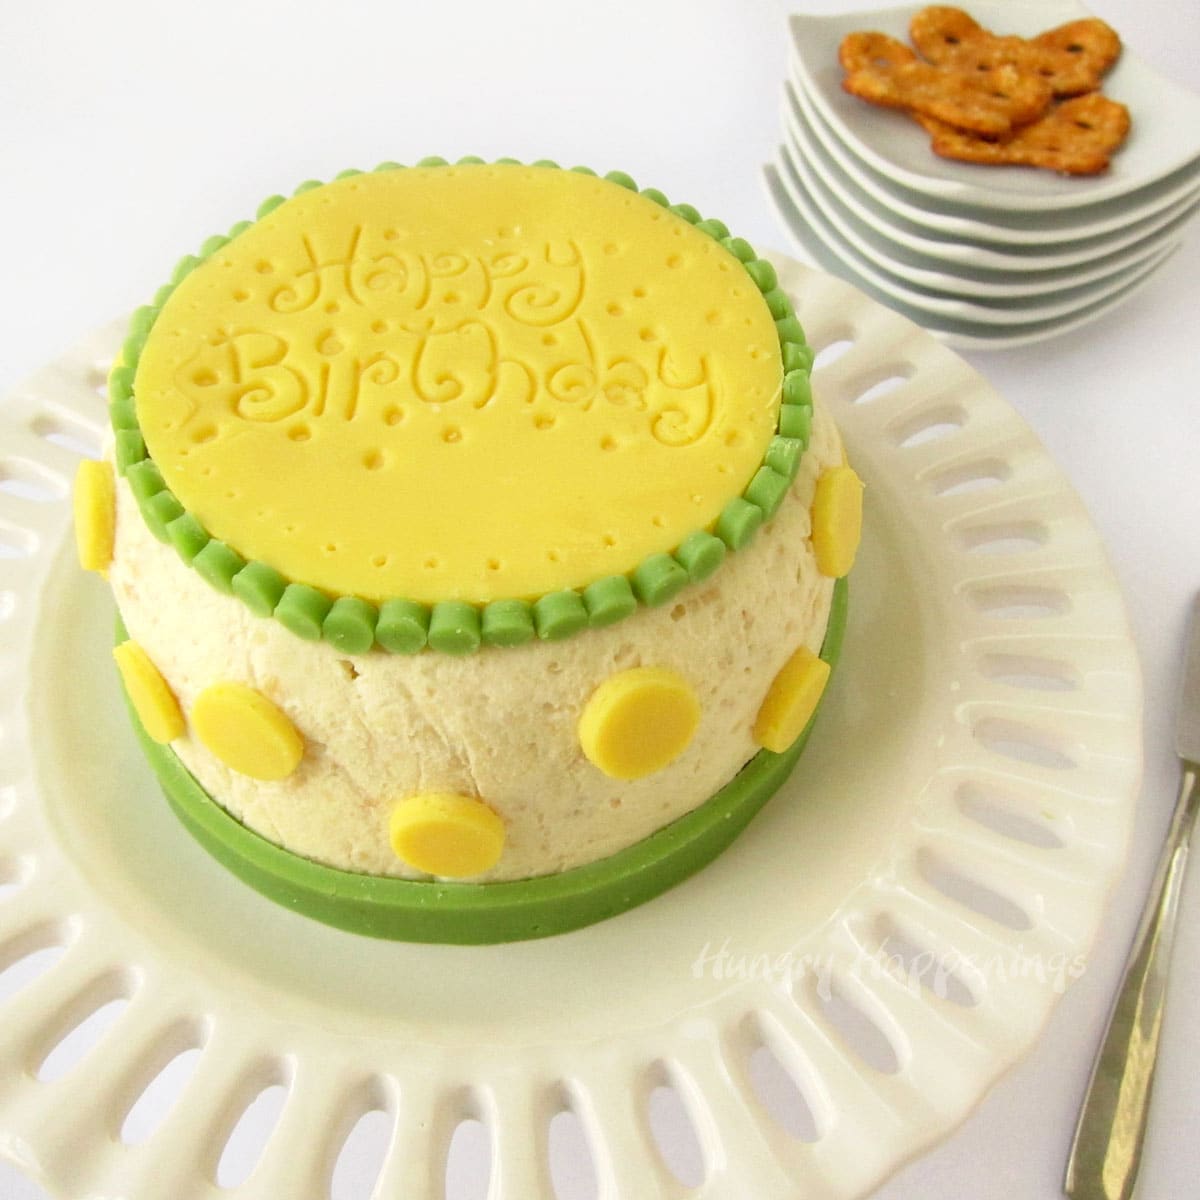 Brightly colored birthday cake cheese ball with yellow polka dots made out of cheese.